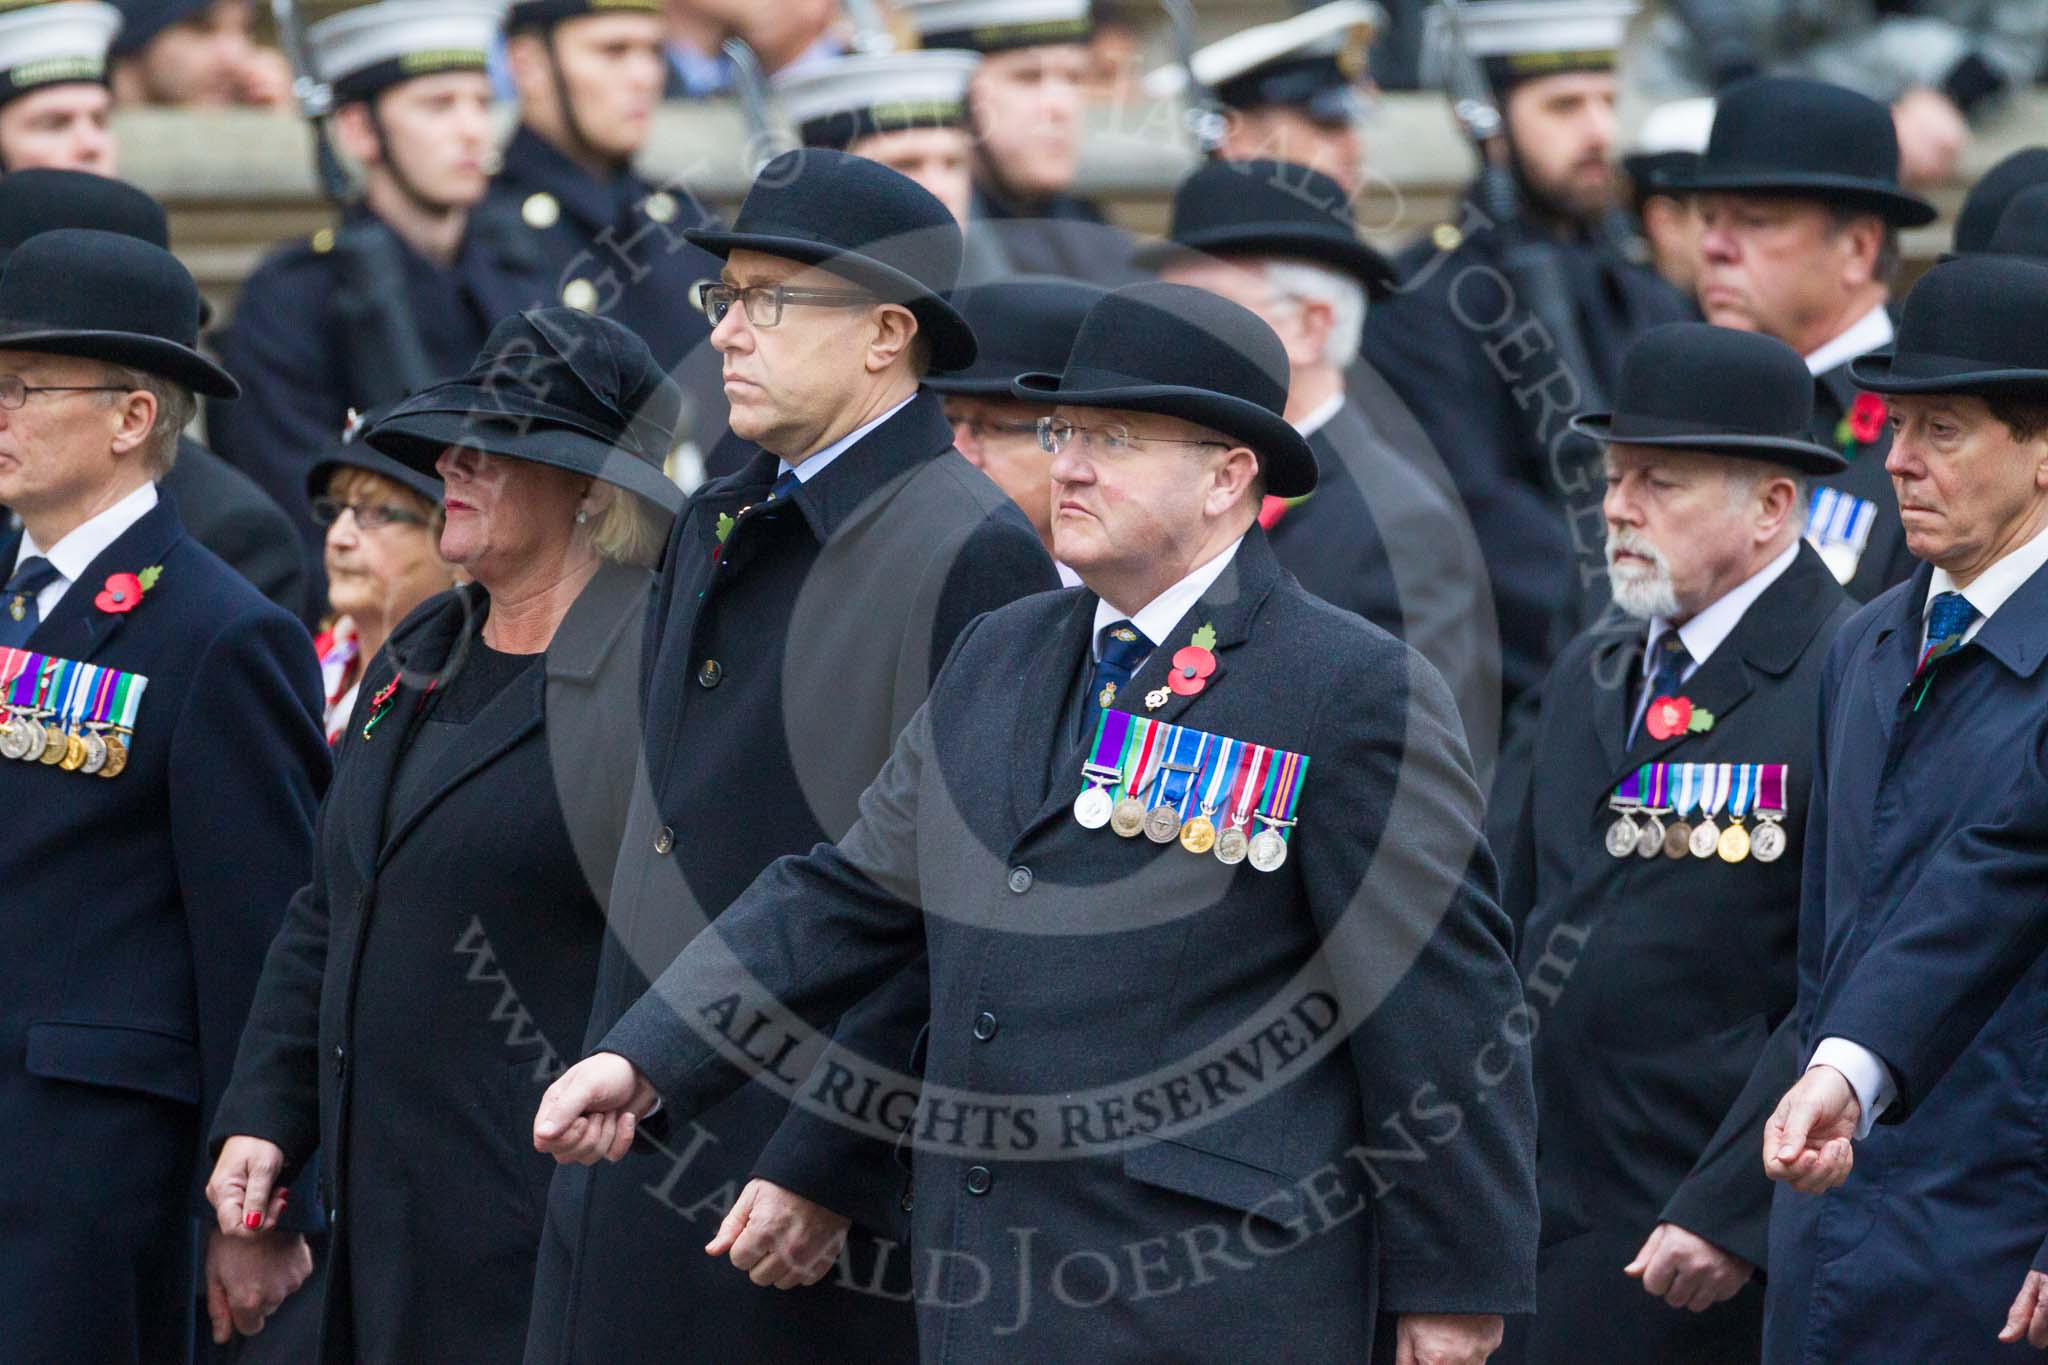 Remembrance Sunday at the Cenotaph 2015: Group B1, Reconnaissance Corps (Anniversary).
Cenotaph, Whitehall, London SW1,
London,
Greater London,
United Kingdom,
on 08 November 2015 at 11:36, image #13